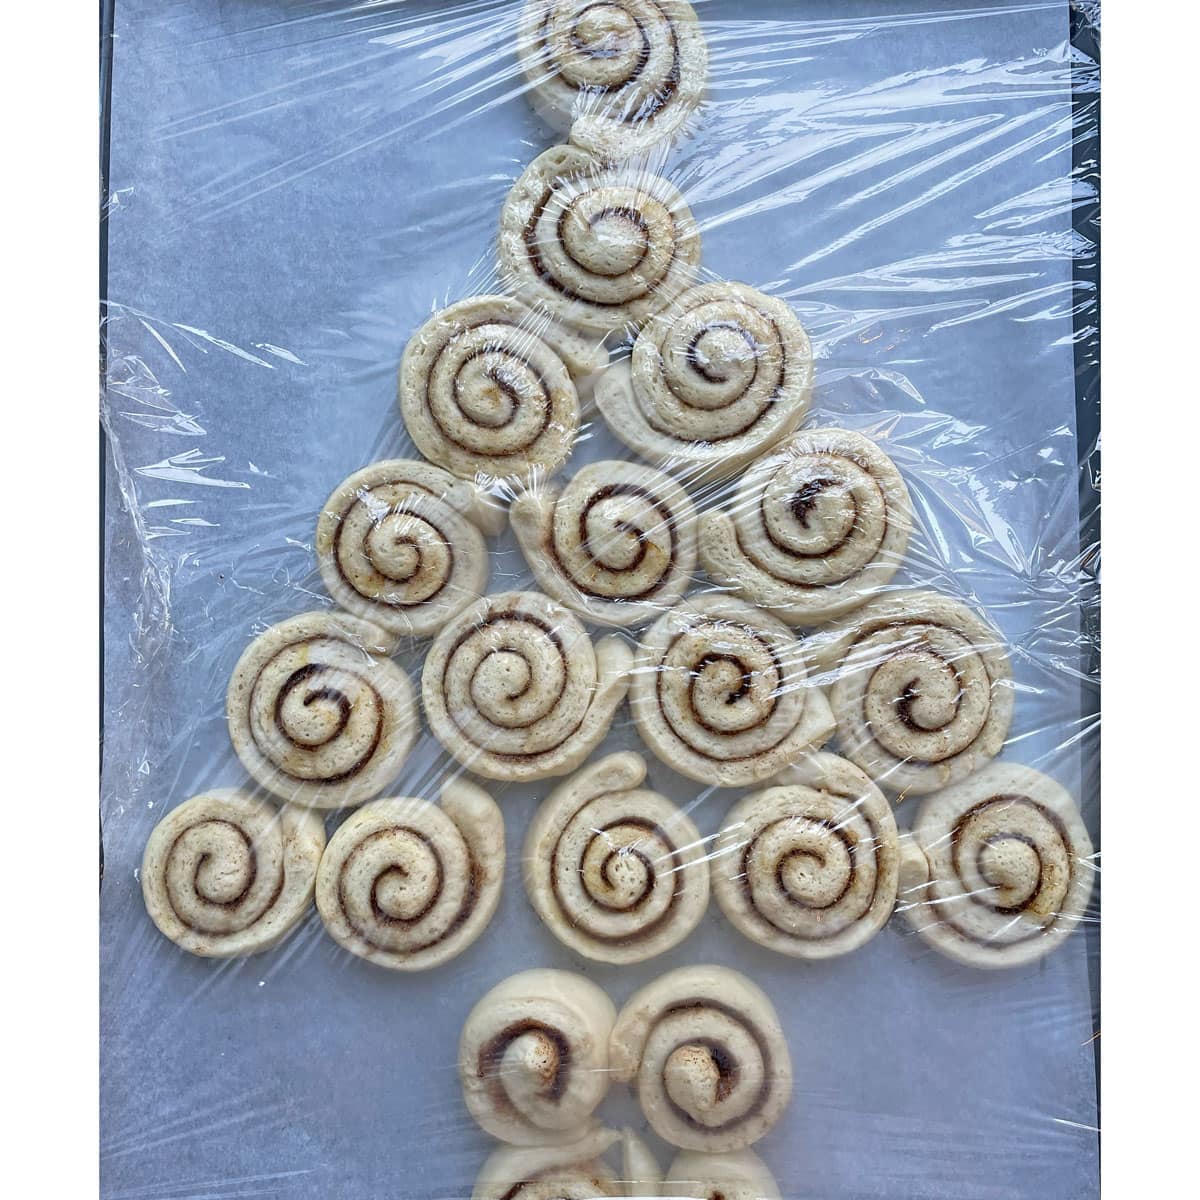 Cinnamon Rolls arranged as Christmas tree and covered to rise.